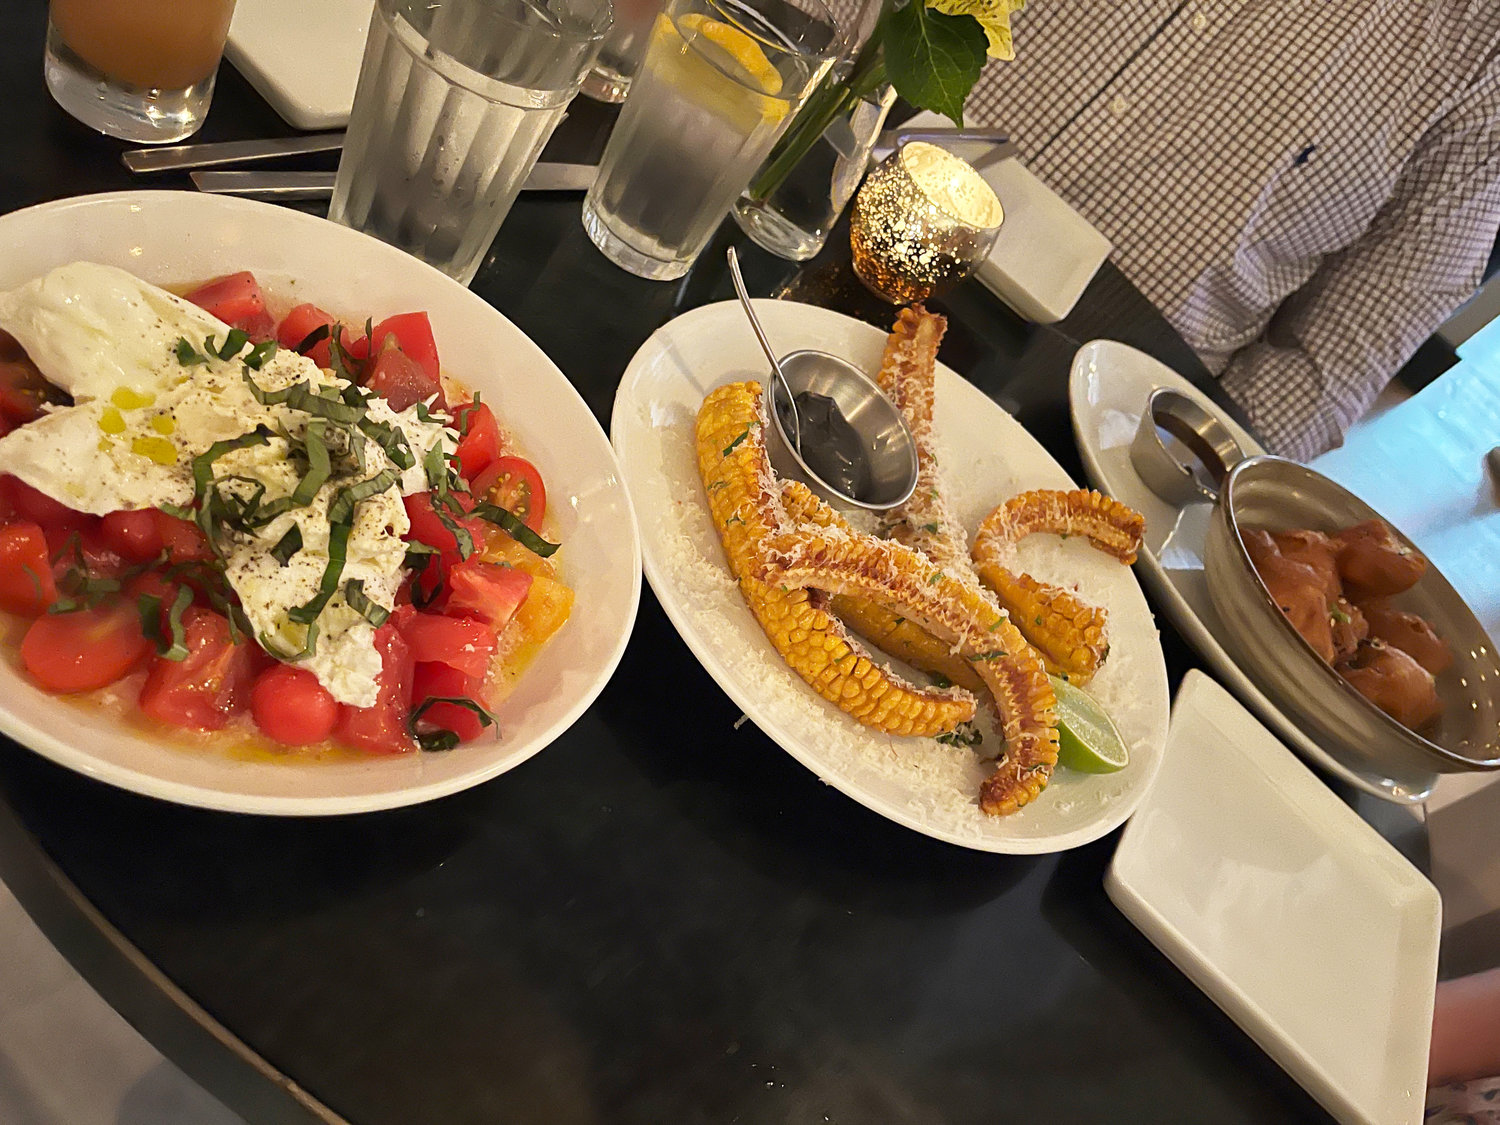 The appetizers, like the entrées, are meant to be shared. Above are the heirloom tomato salad and the street corn.